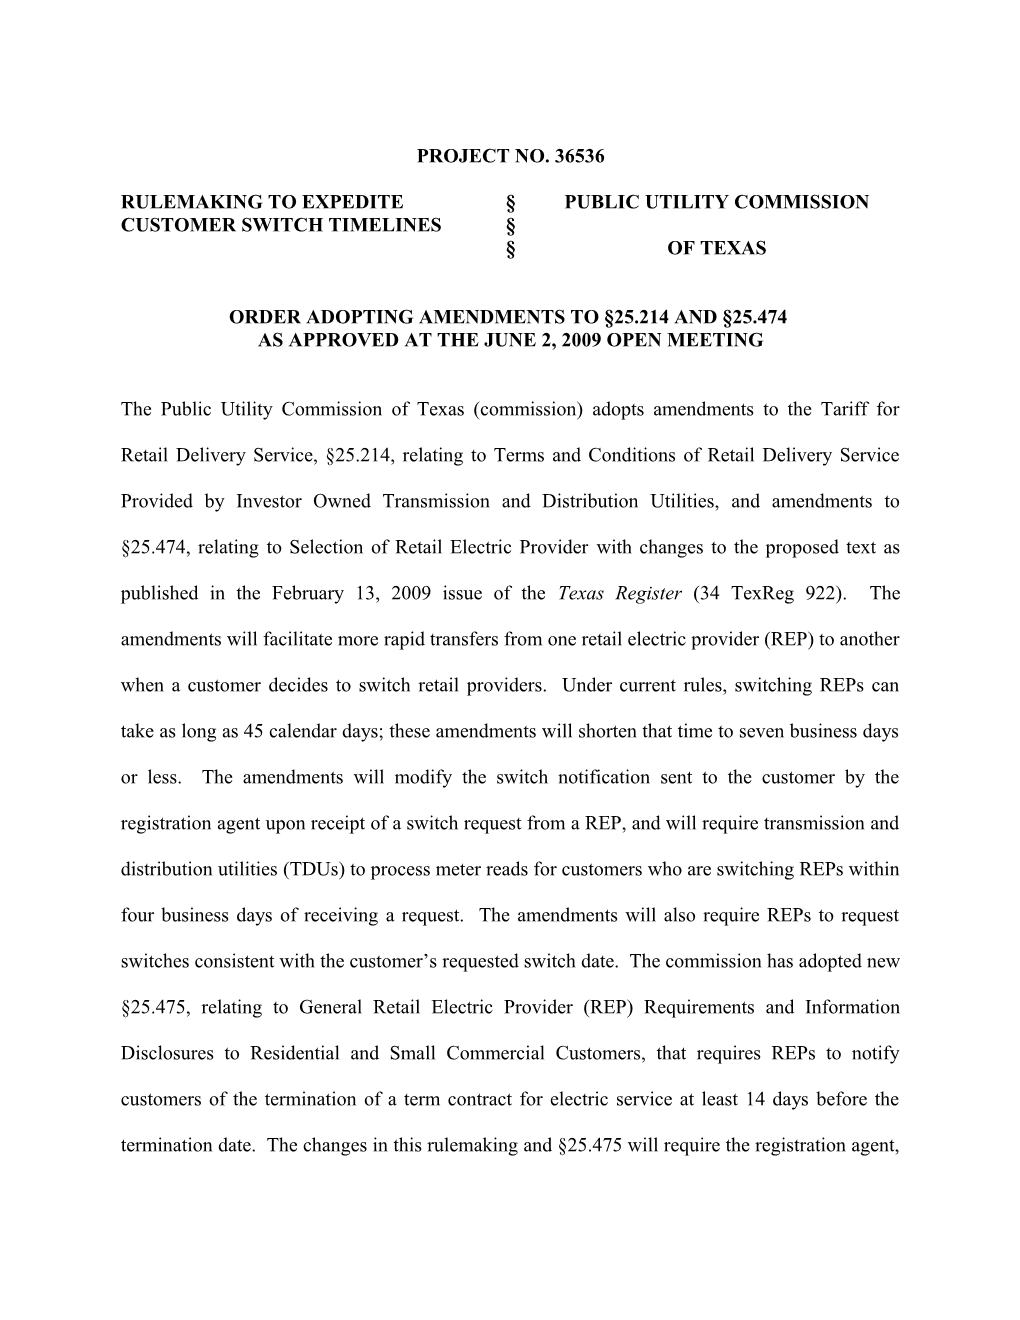 The Public Utility Commission of Texas Adopts and Amendment to Substantive Rule 23.21 With